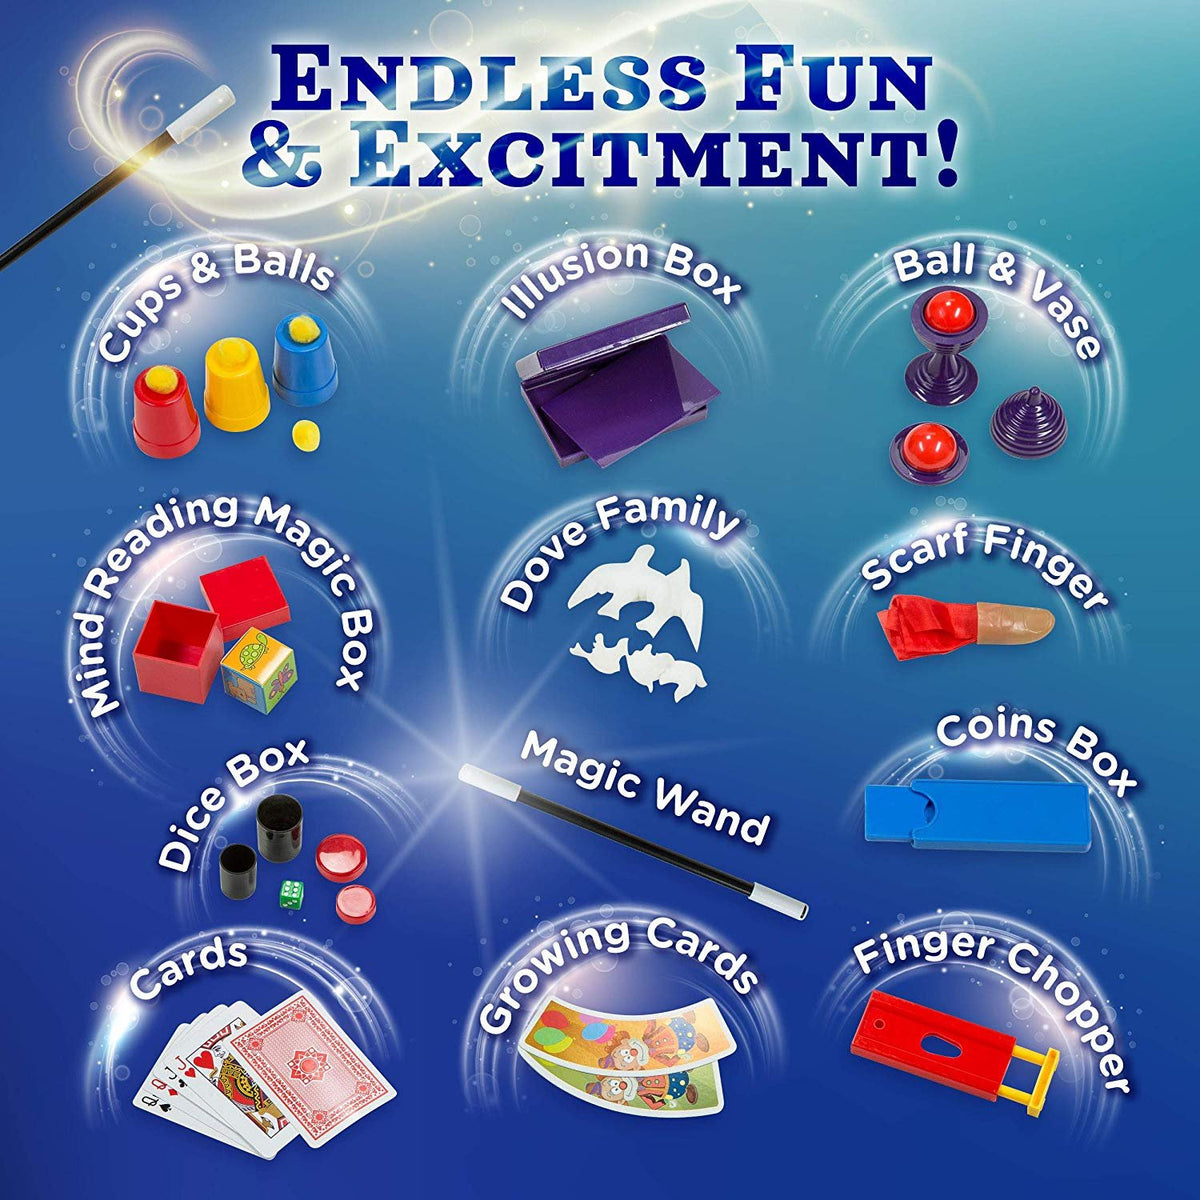 28 Fun Things to Keep Kids Busy, Four Magic Towels, Pocket Etch a